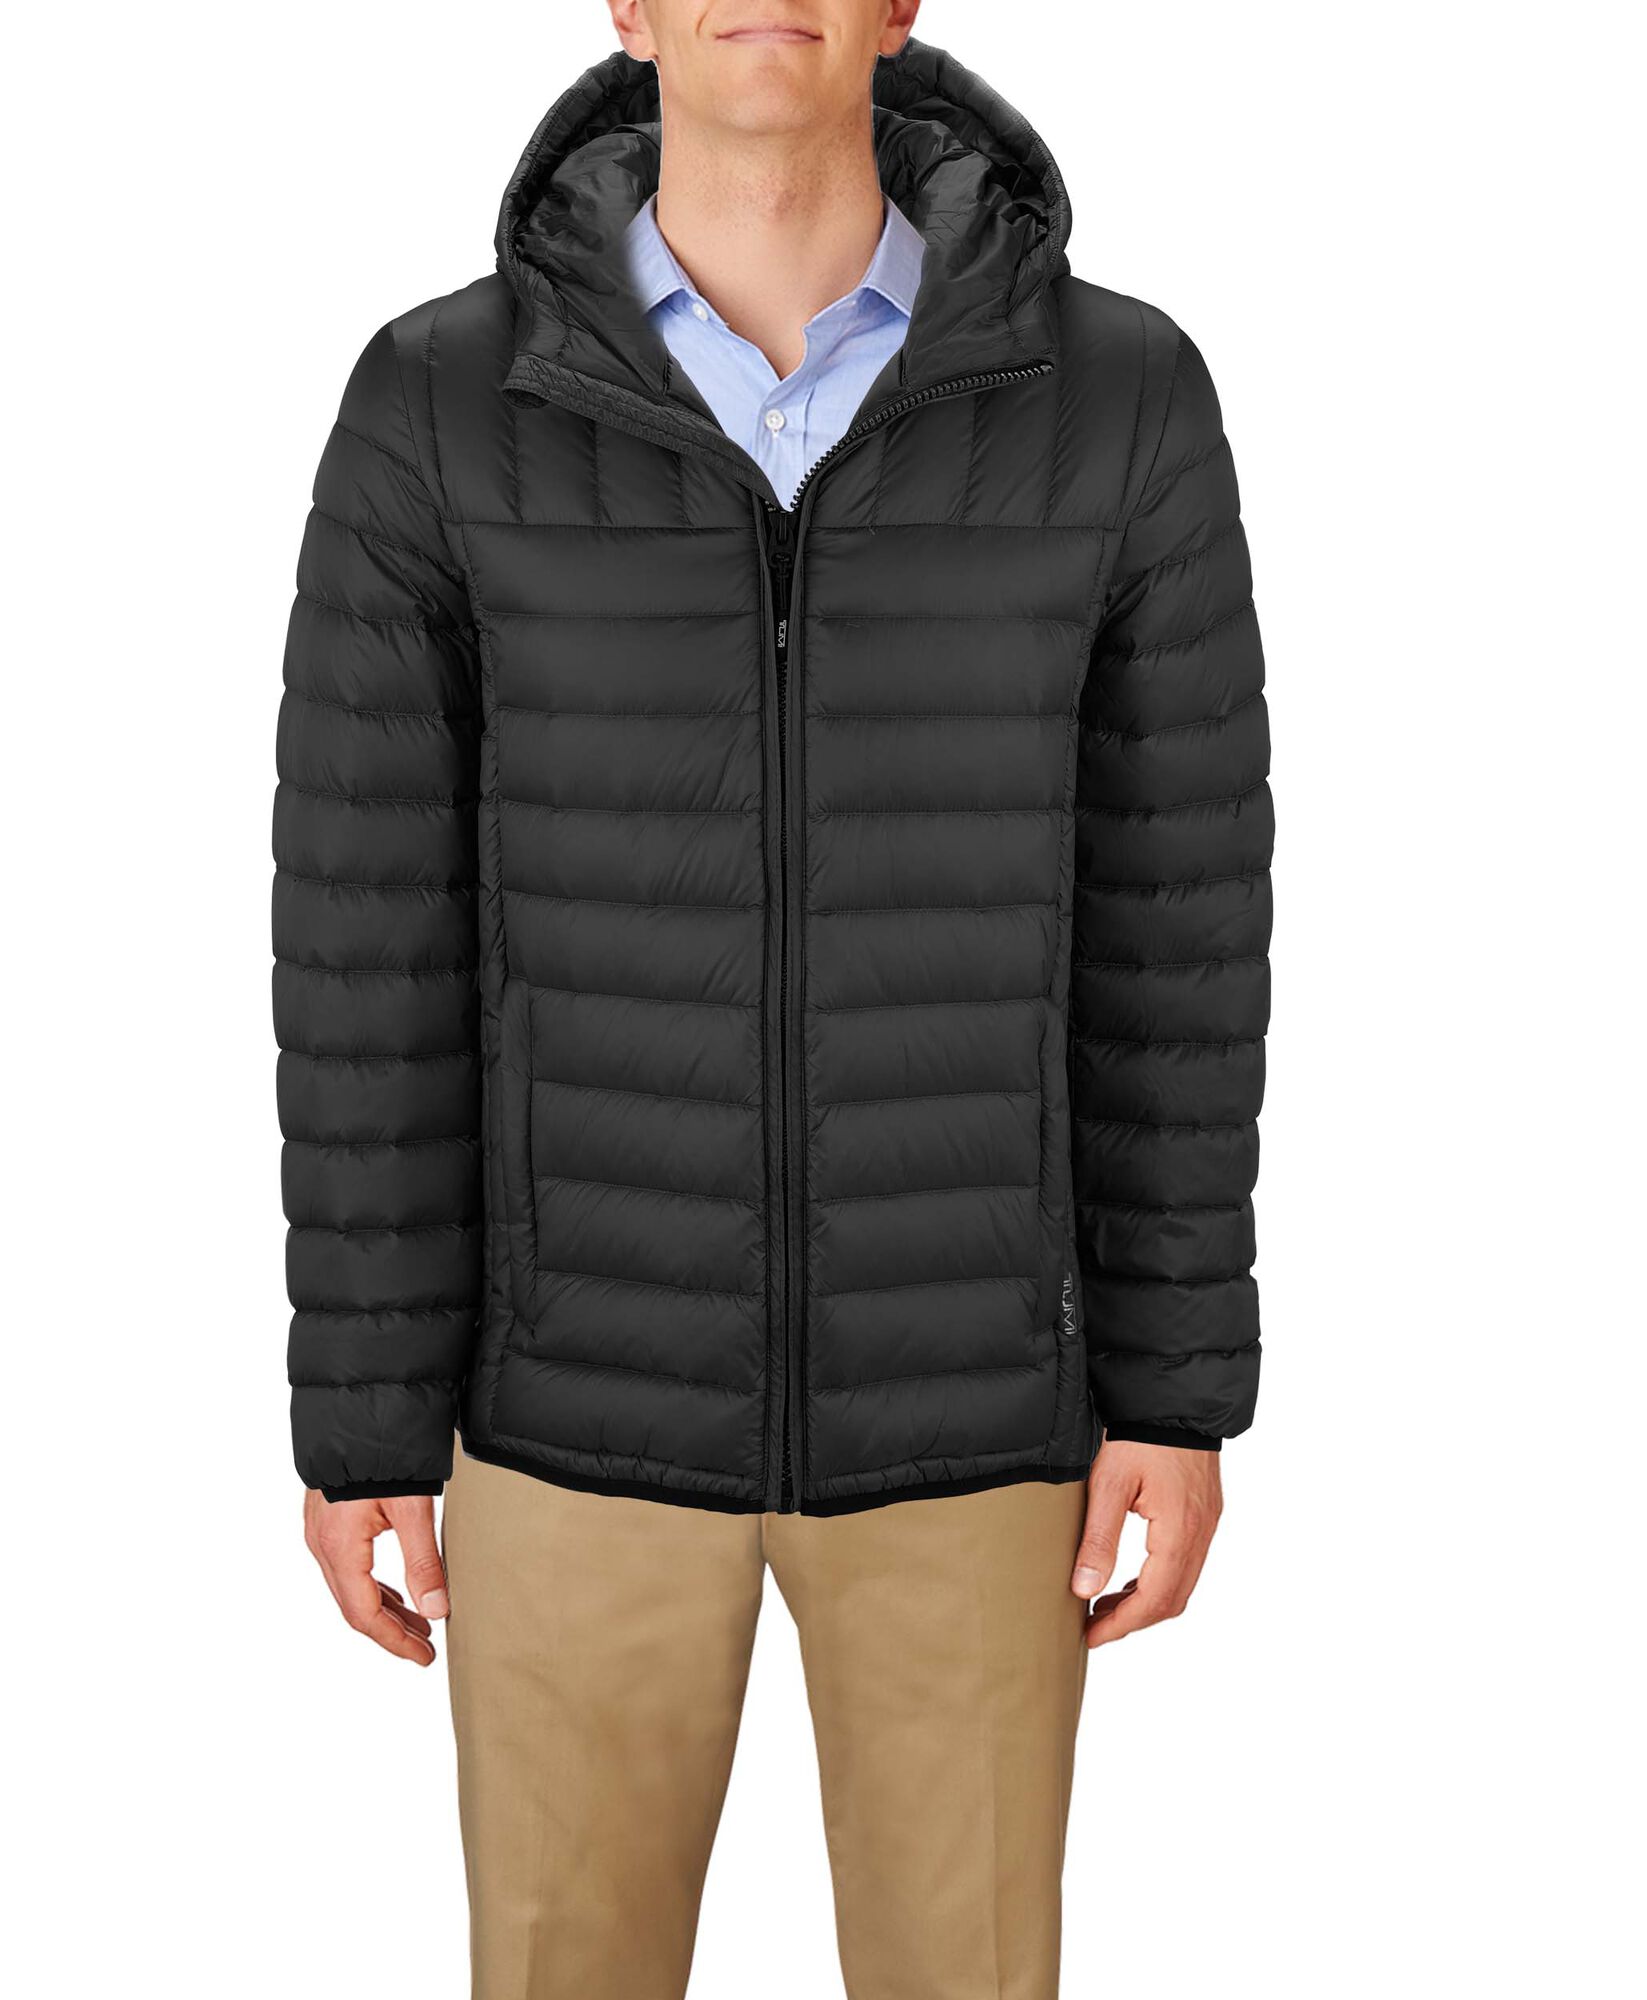 Crossover Hooded Jacket Tumi PAX Outerwear